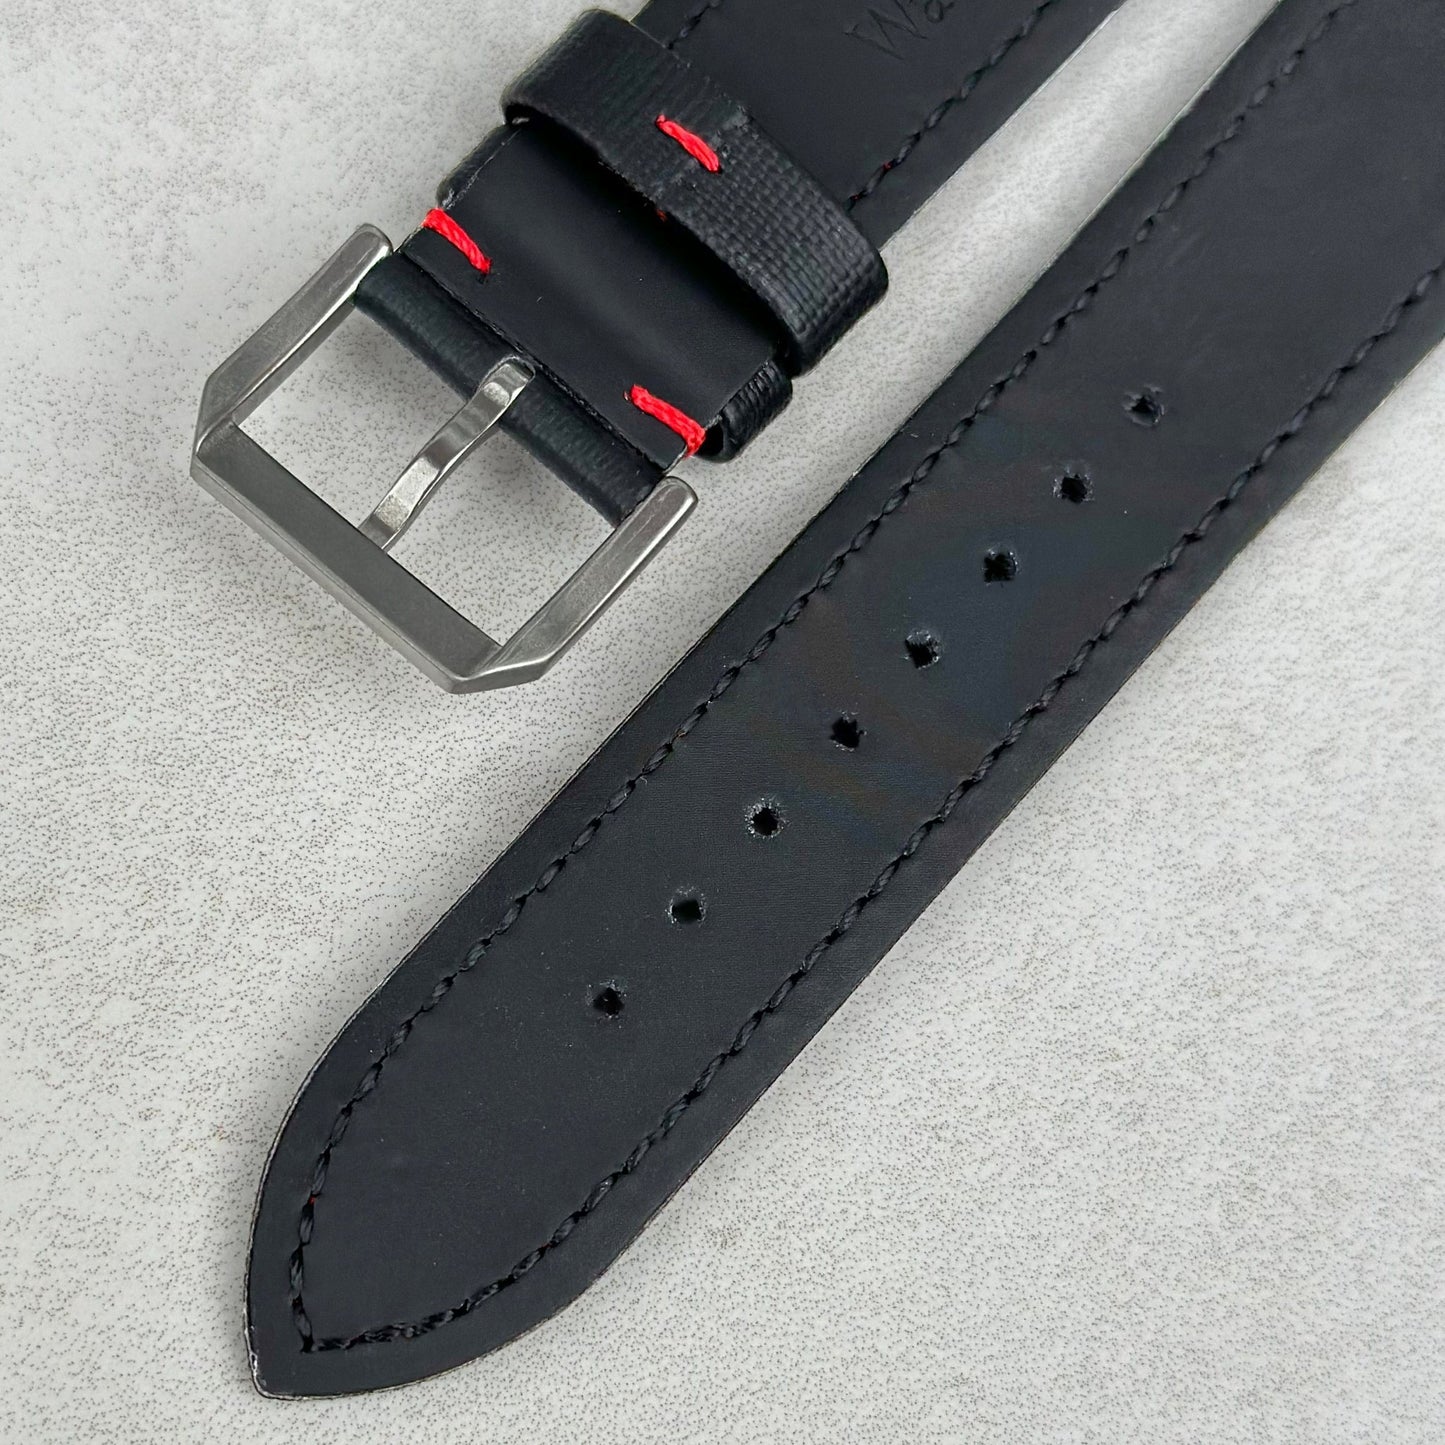 Underside of the buckle Bermuda jet black sail cloth watch strap with red stitching. Watch And Strap